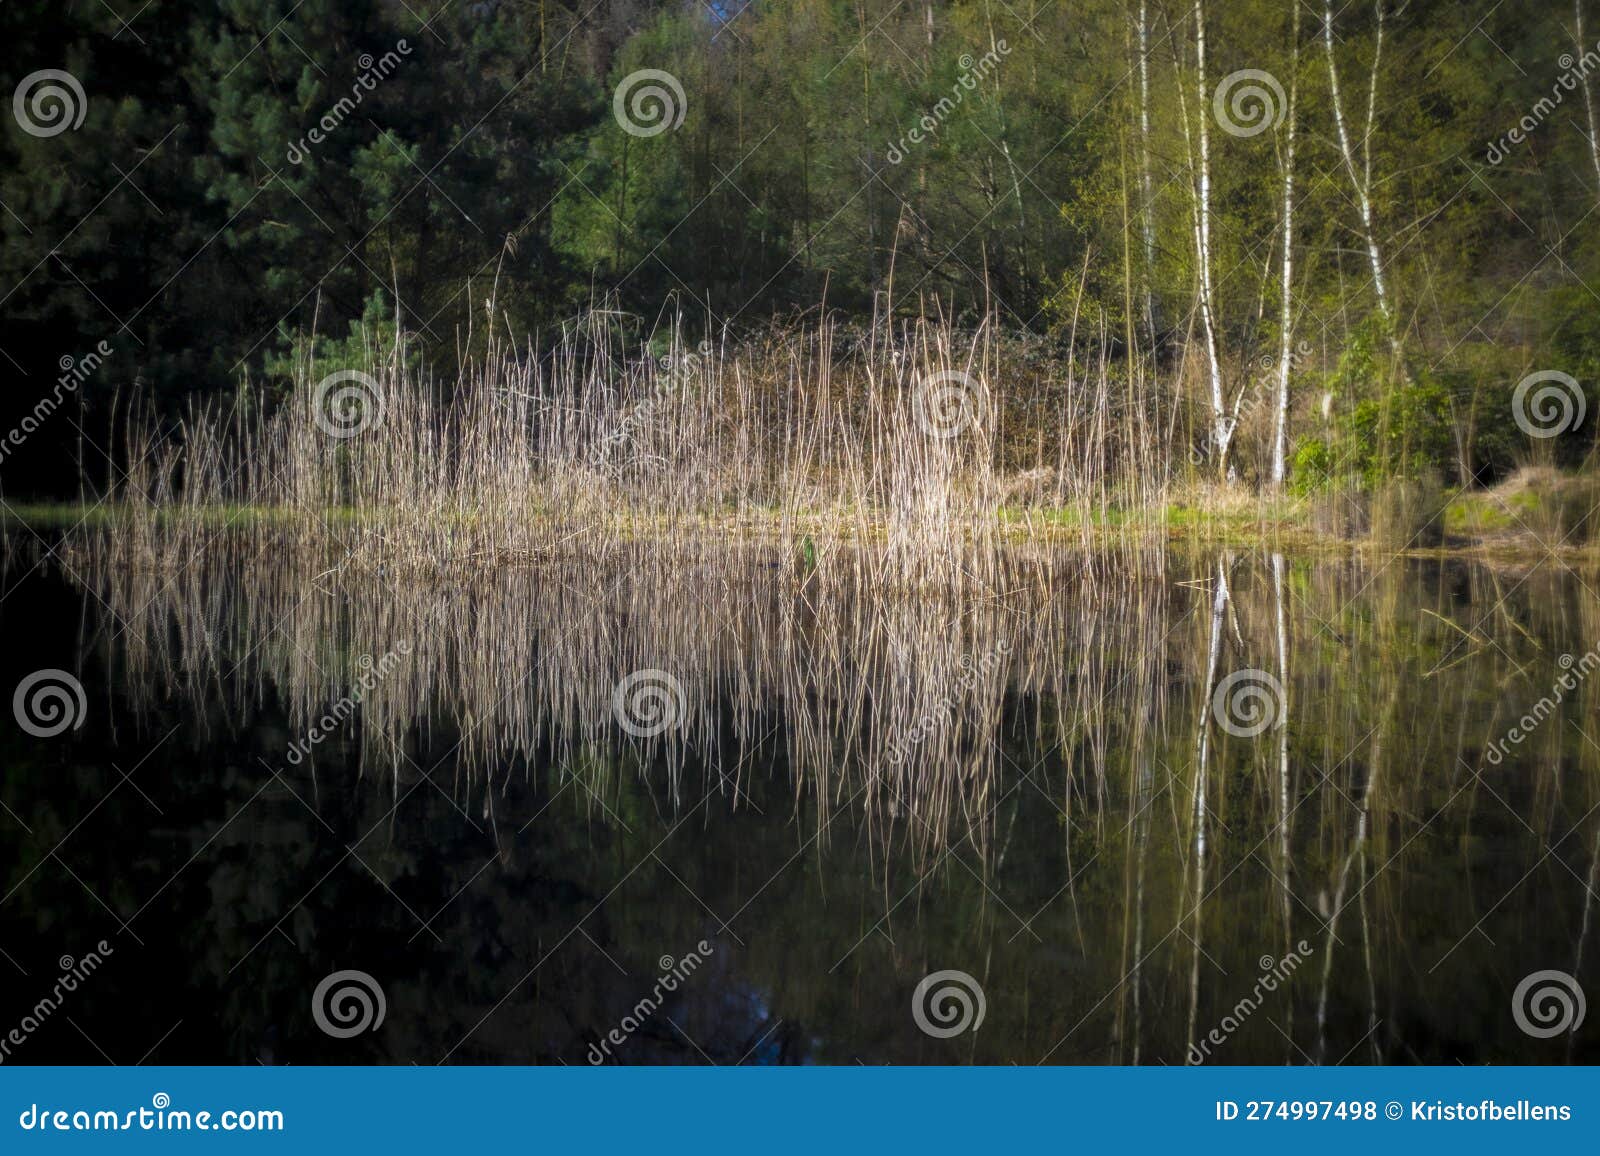 reed field with reflection in a pond in a forest